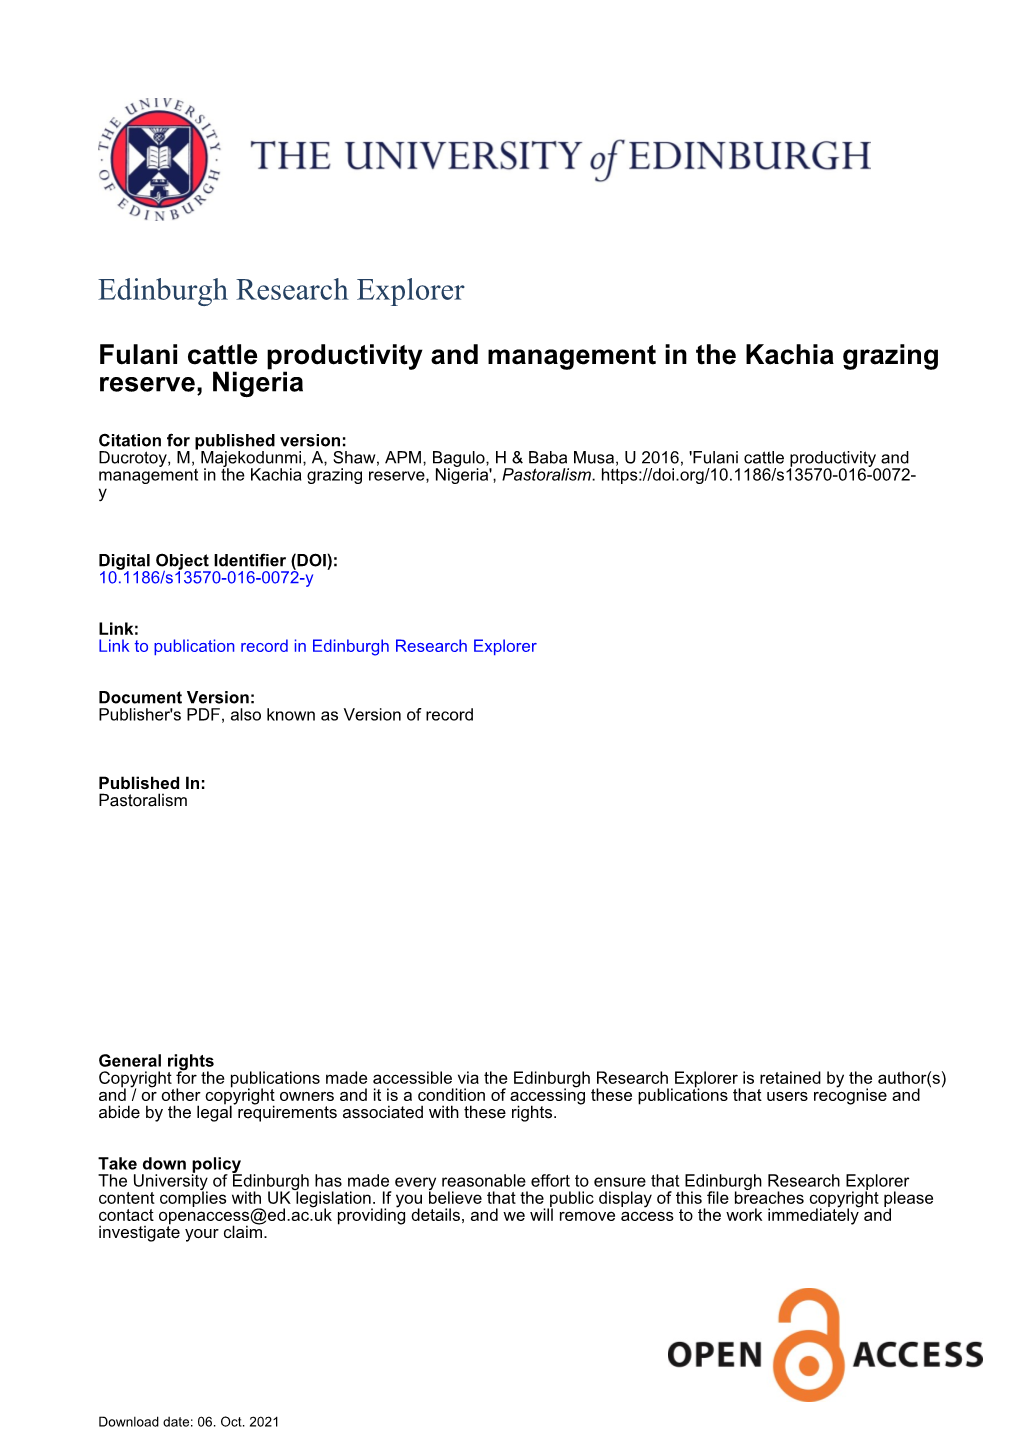 Fulani Cattle Productivity and Management in the Kachia Grazing Reserve, Nigeria